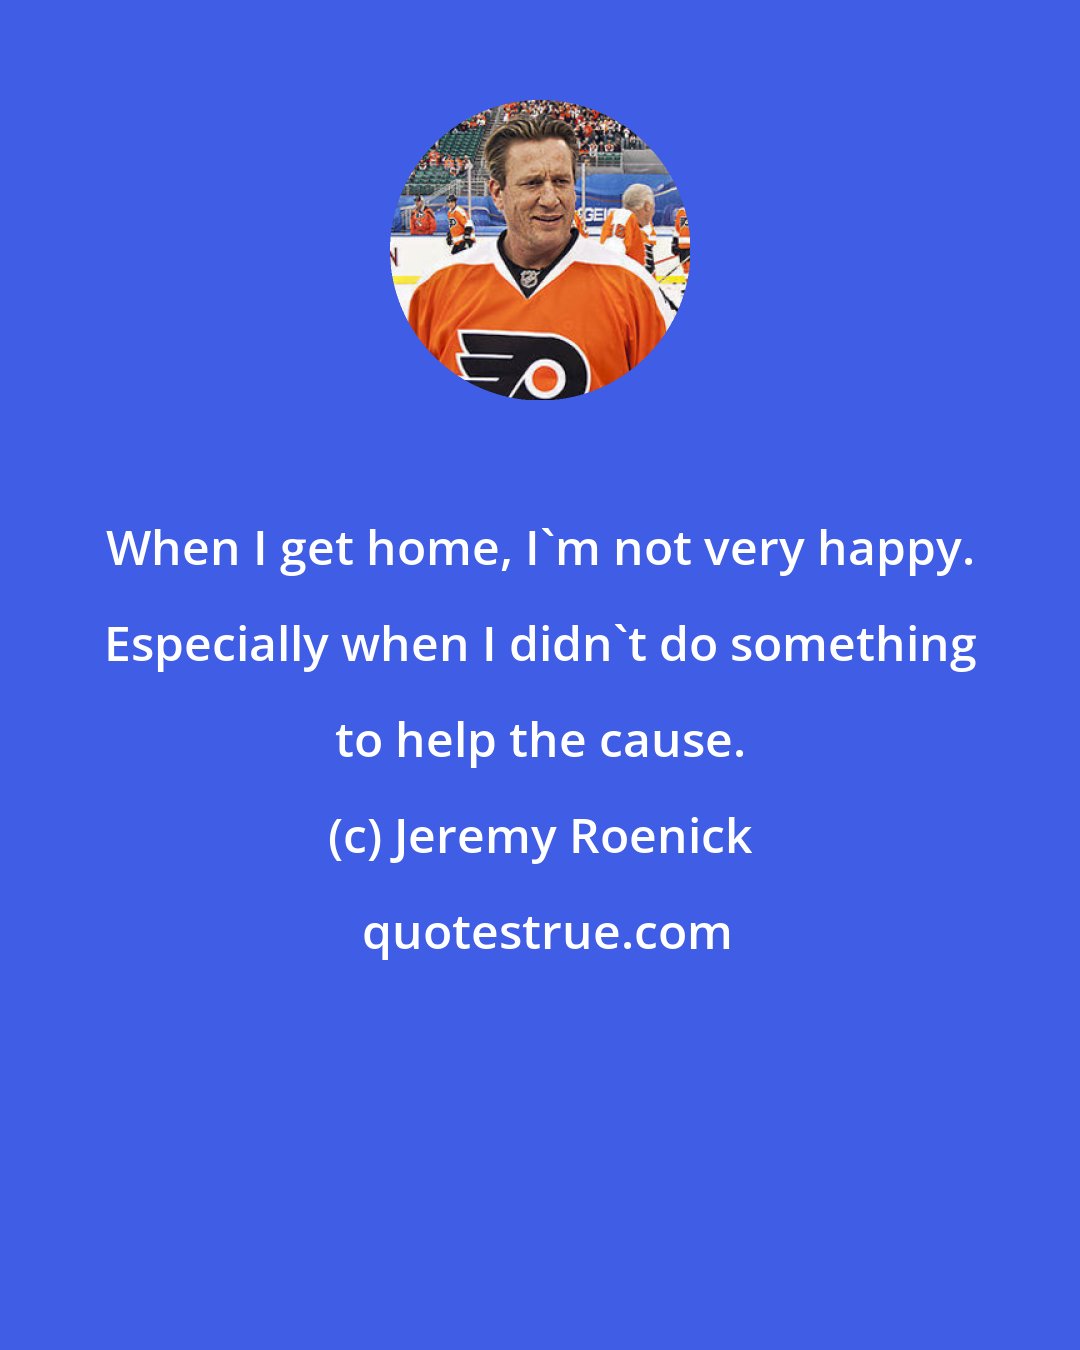 Jeremy Roenick: When I get home, I'm not very happy. Especially when I didn't do something to help the cause.